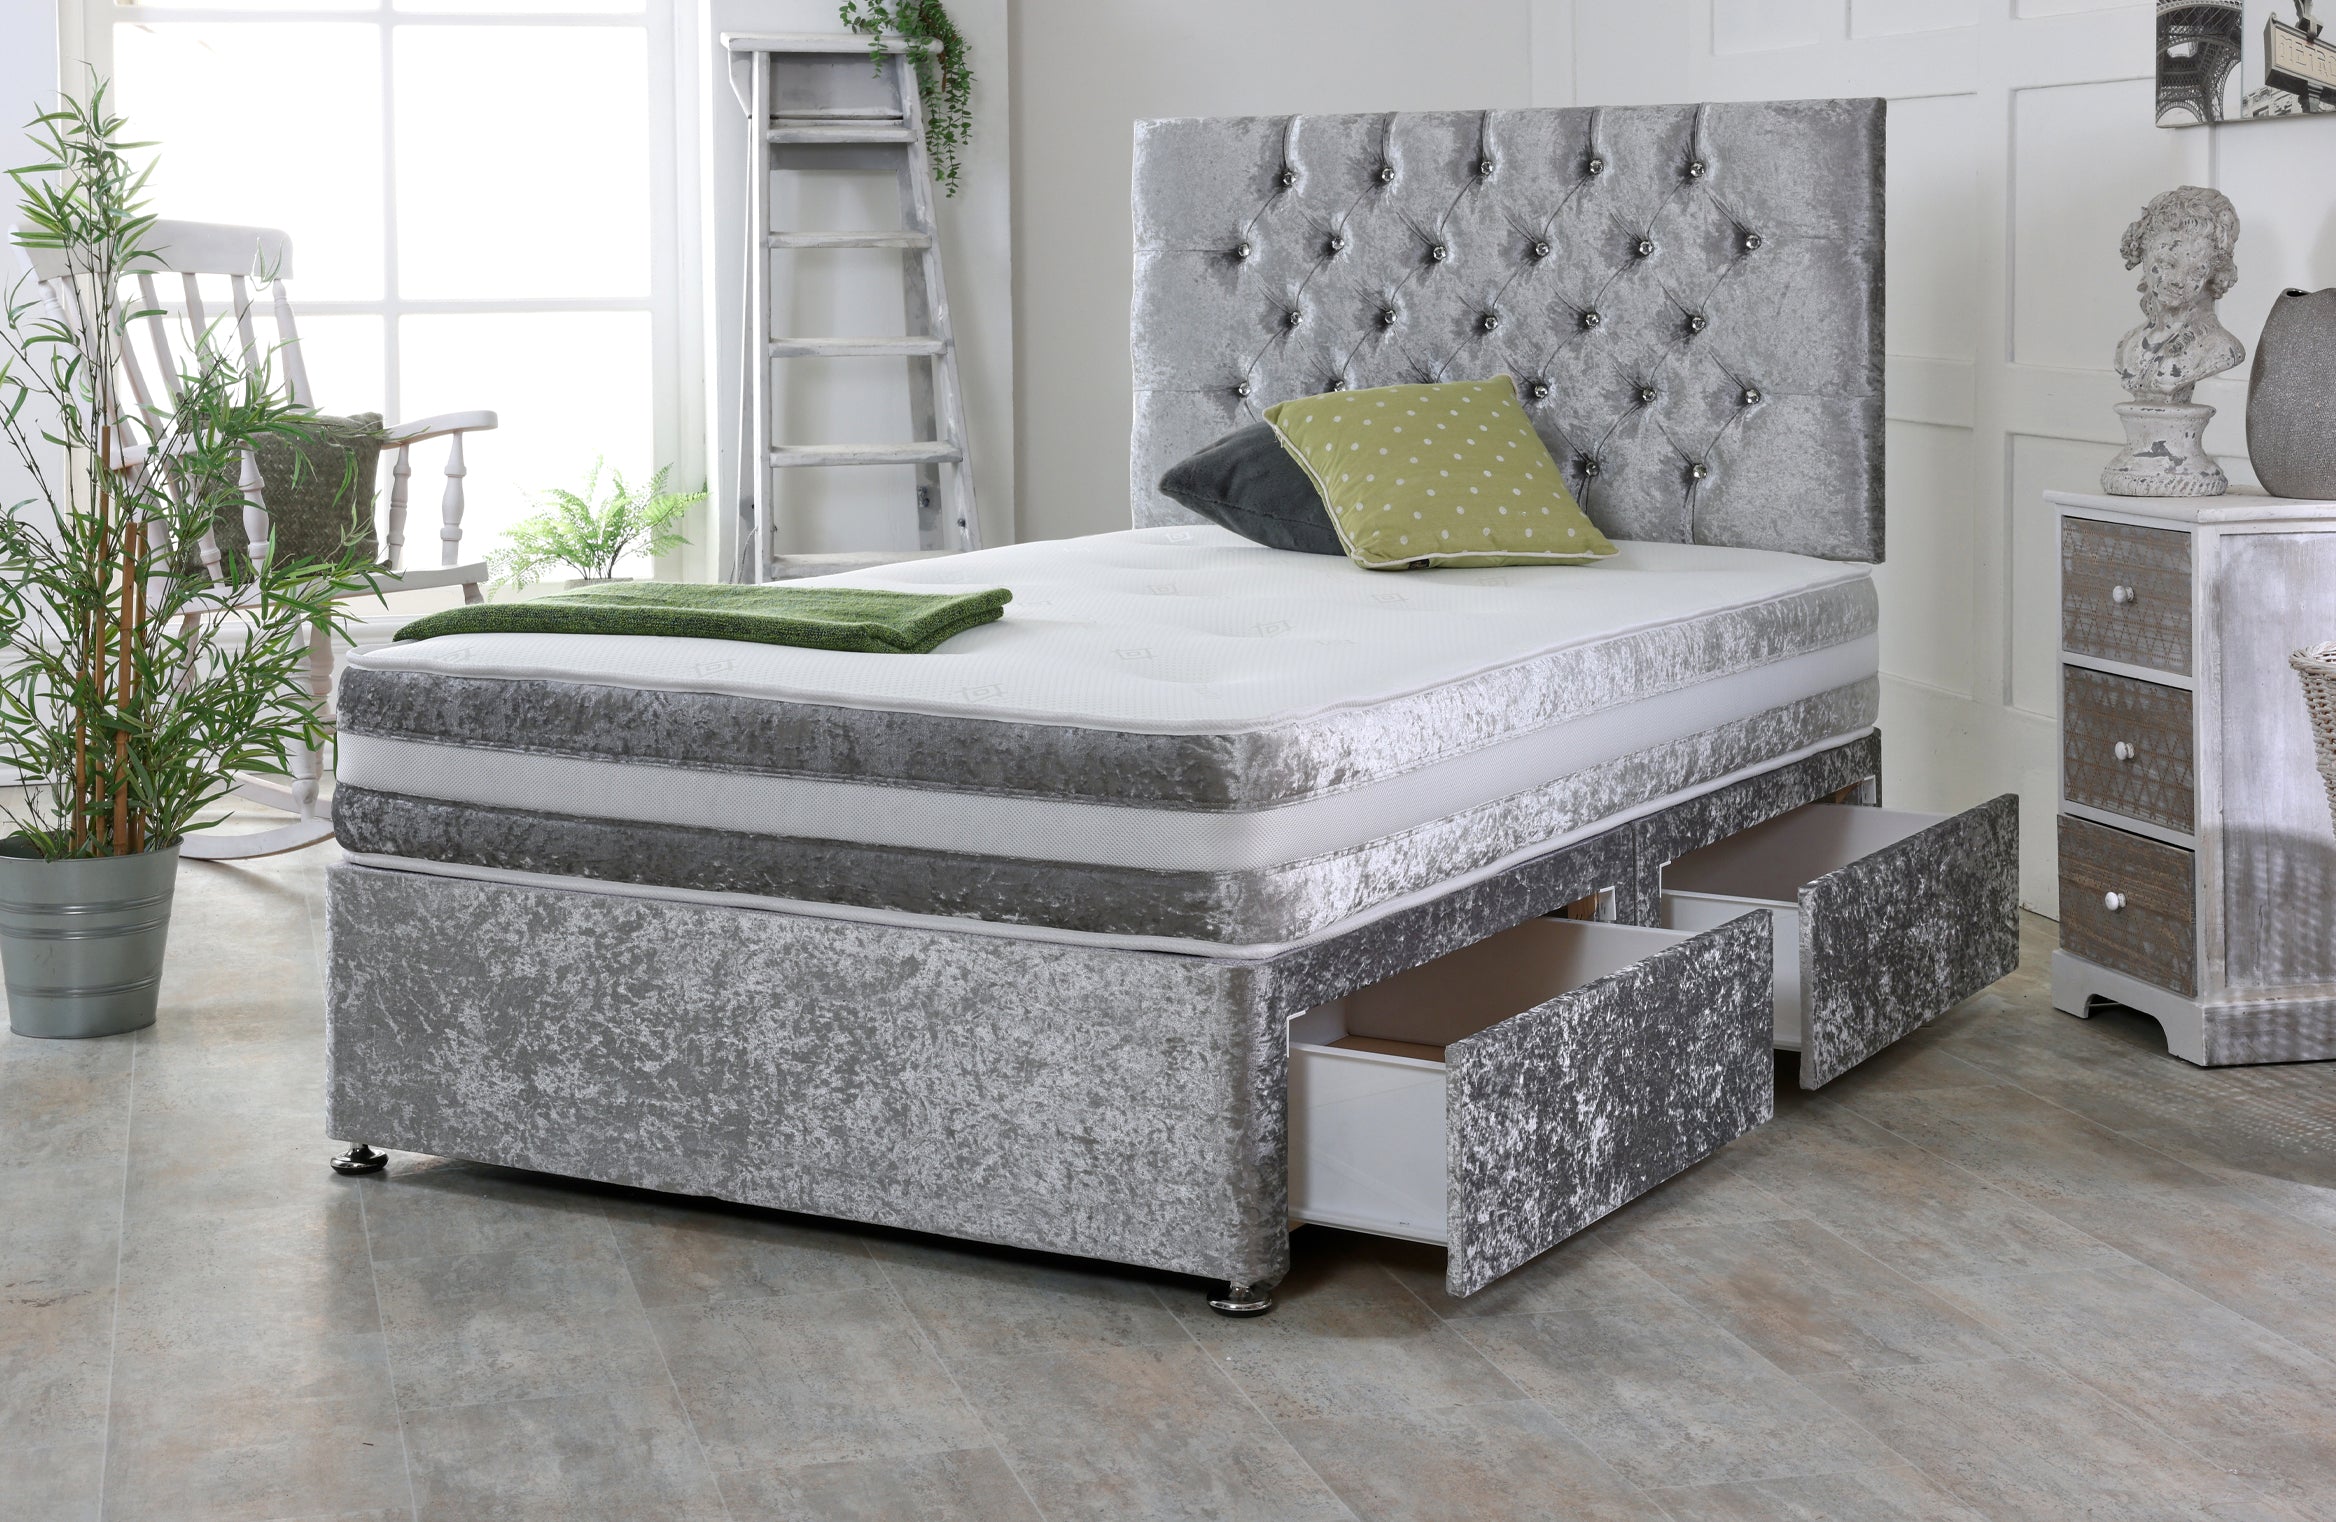 Chesterfield Crushed Velvet Divan Bed Base Set with Mattress and Headboard